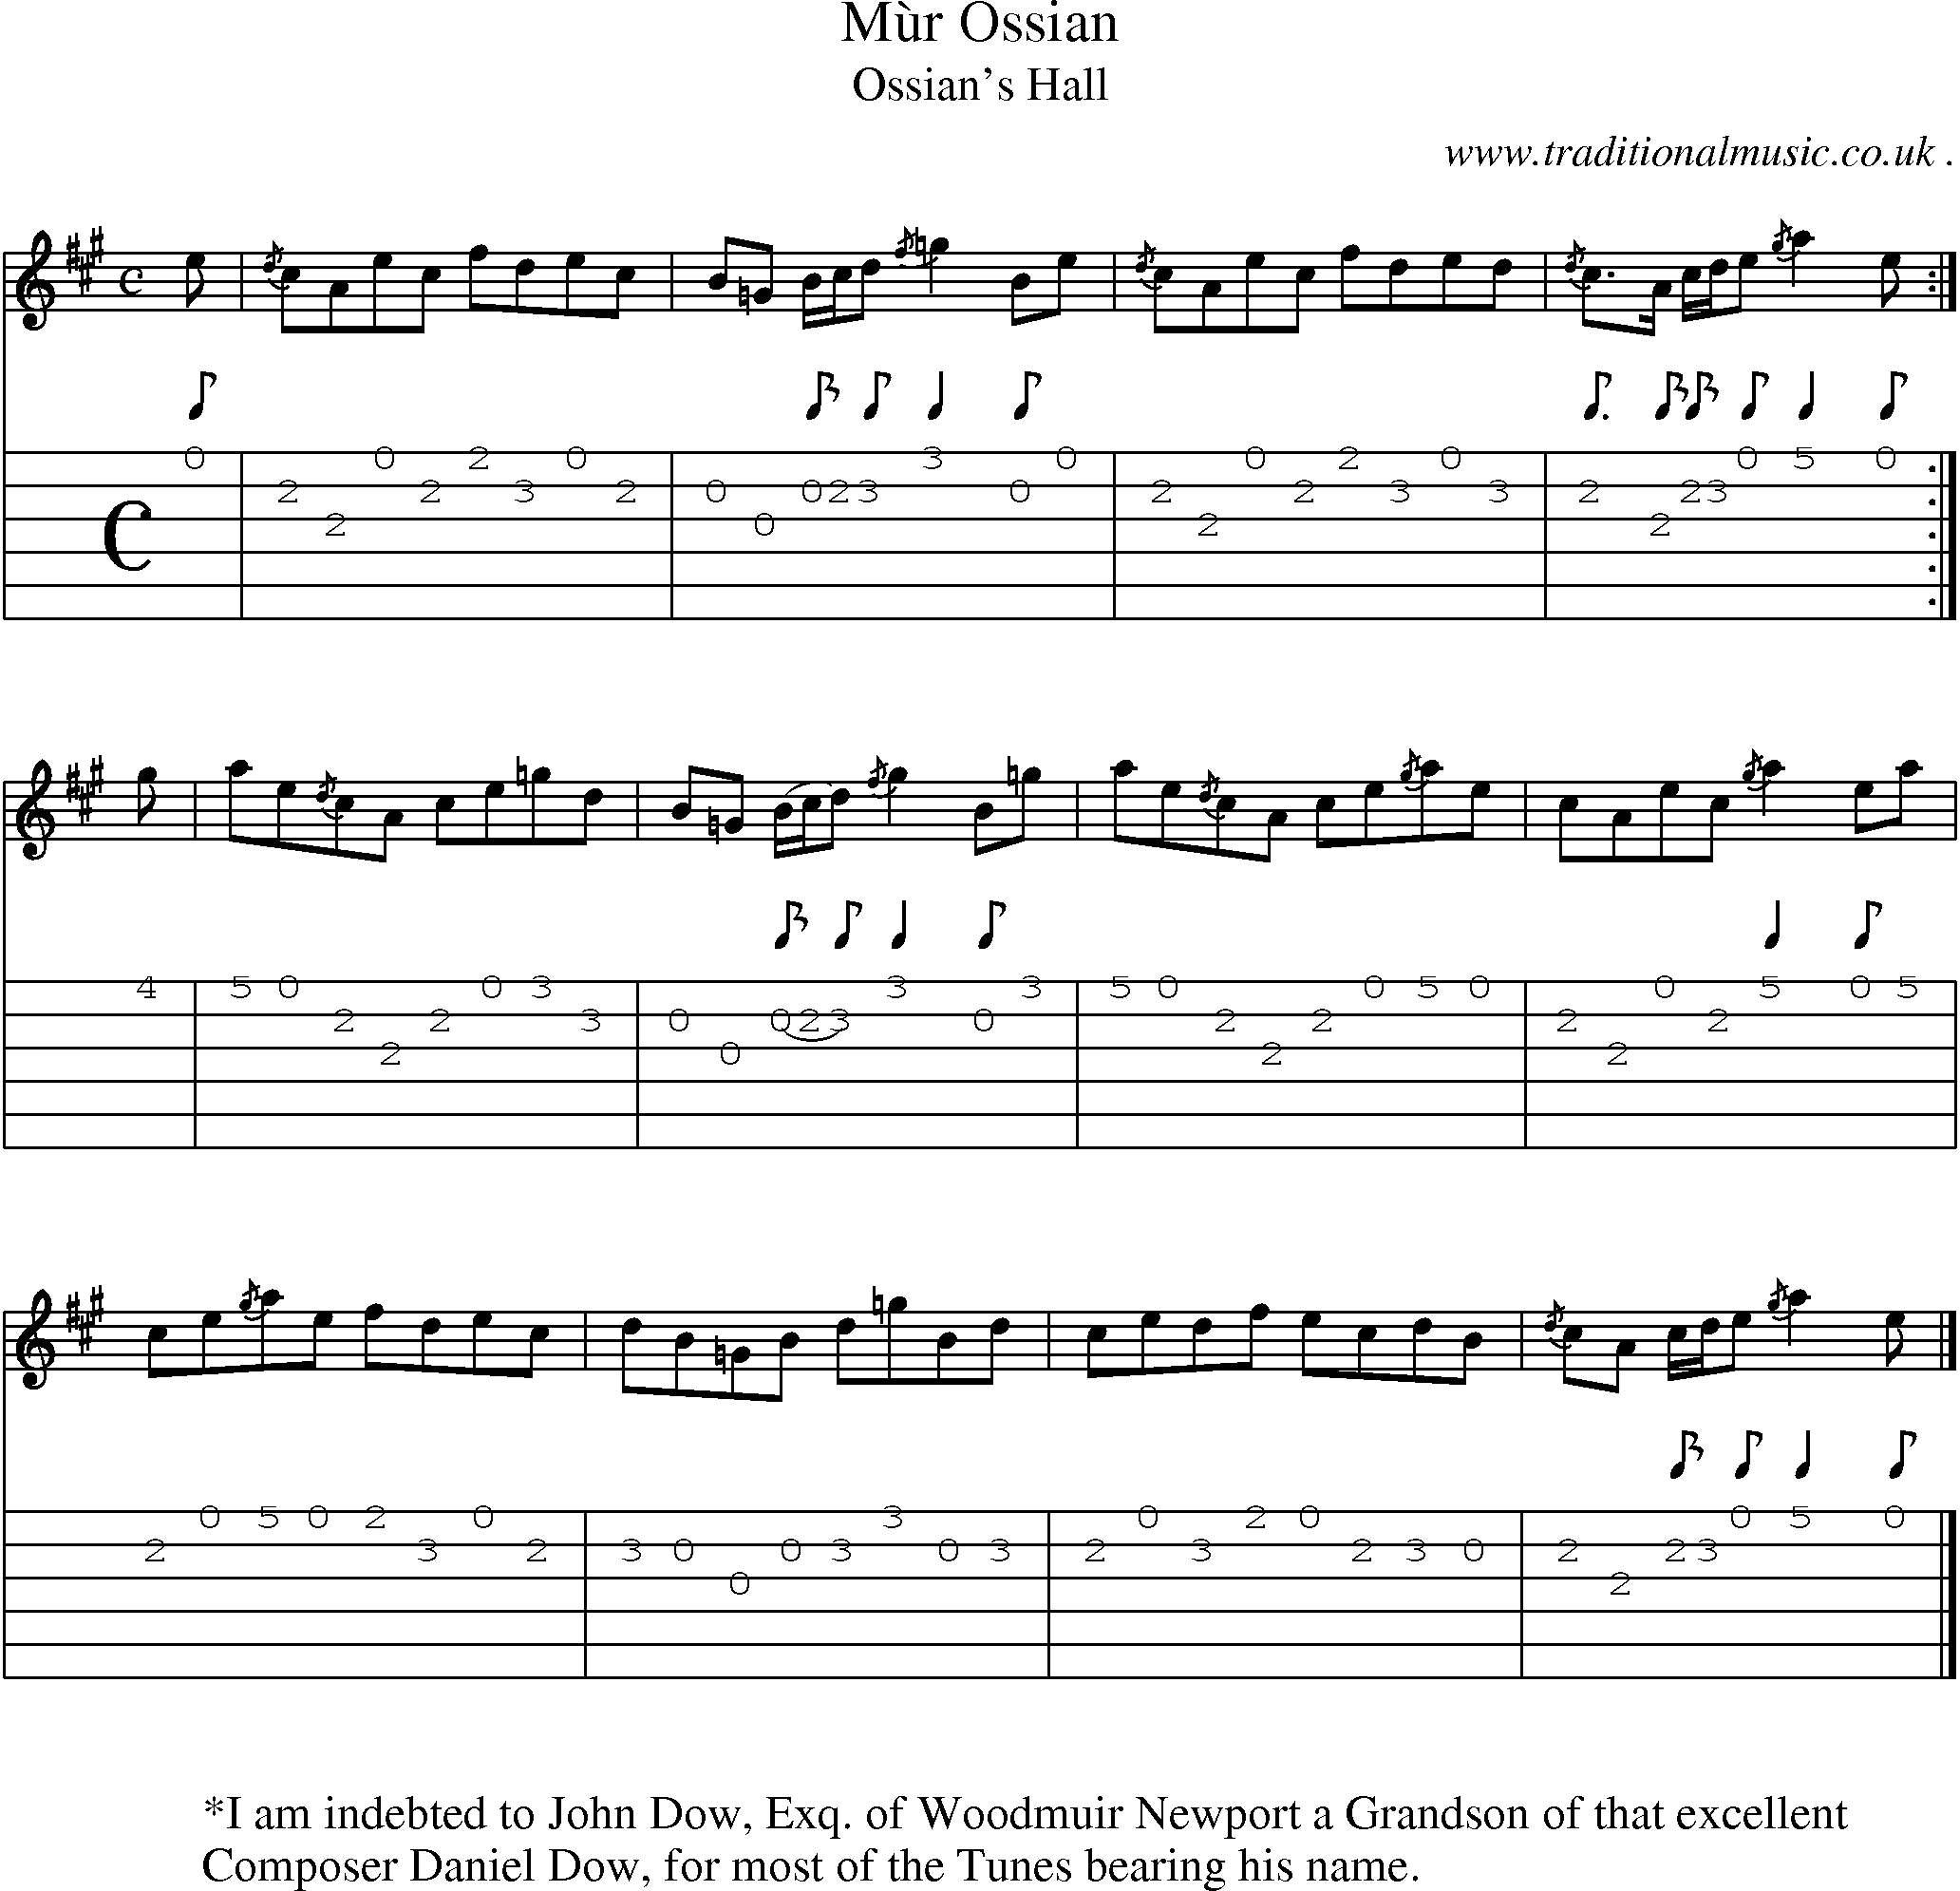 Sheet-music  score, Chords and Guitar Tabs for Mur Ossian